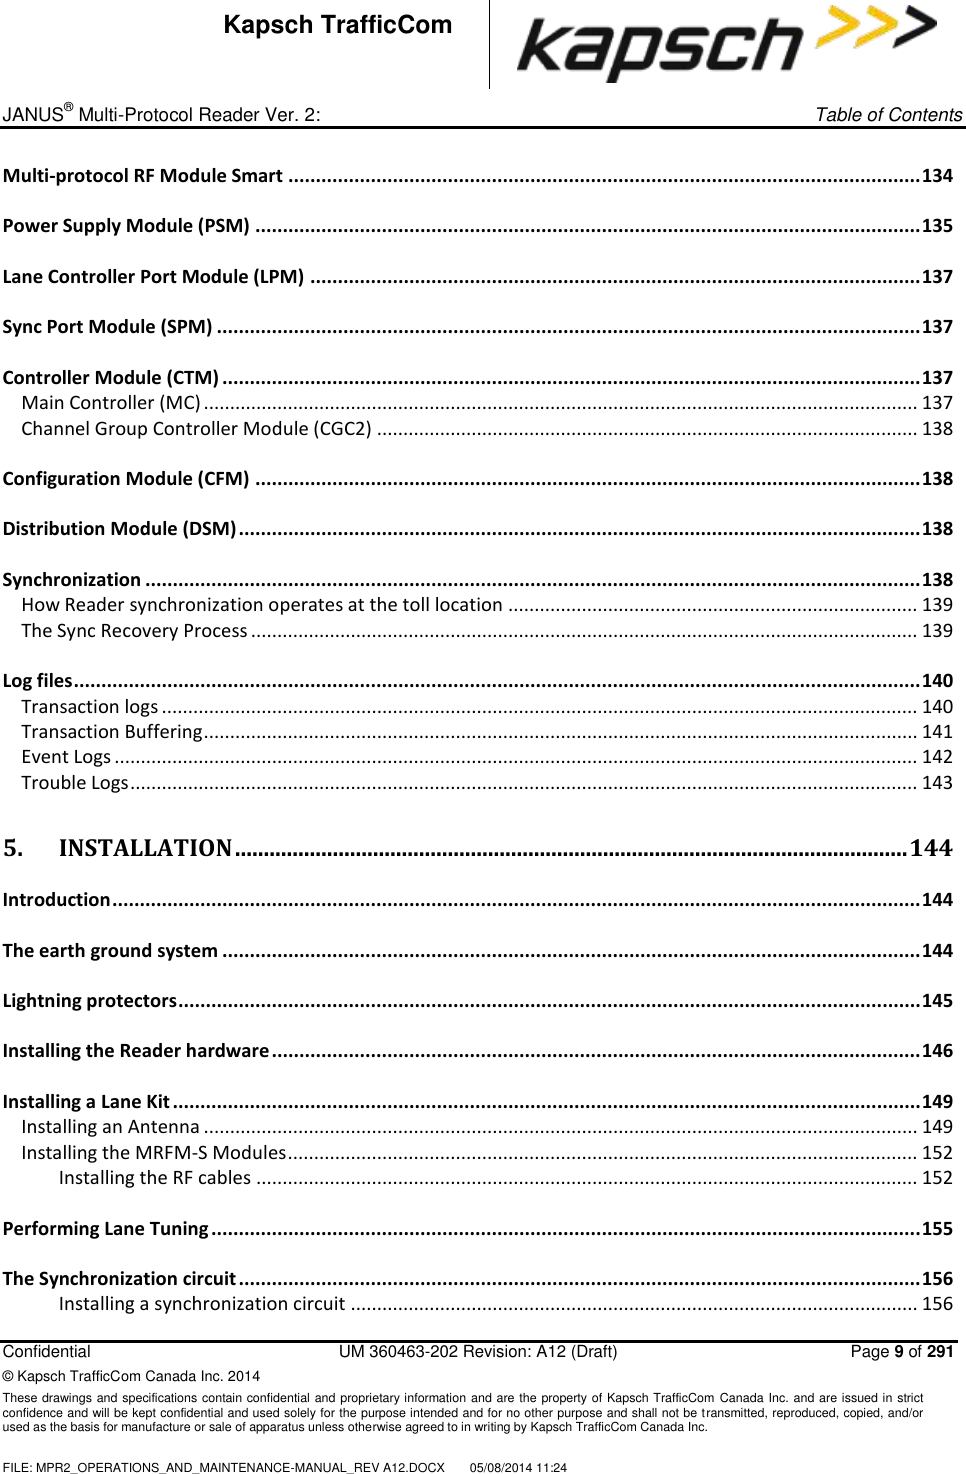 _ JANUS® Multi-Protocol Reader Ver. 2:     Table of Contents   Confidential  UM 360463-202 Revision: A12 (Draft)   Page 9 of 291 © Kapsch TrafficCom Canada Inc. 2014 These drawings and specifications contain confidential and proprietary information and are the property of Kapsch TrafficCom  Canada Inc. and are issued in strict confidence and will be kept confidential and used solely for the purpose intended and for no other purpose and shall not be transmitted, reproduced, copied, and/or used as the basis for manufacture or sale of apparatus unless otherwise agreed to in writing by Kapsch TrafficCom Canada Inc.  FILE: MPR2_OPERATIONS_AND_MAINTENANCE-MANUAL_REV A12.DOCX  05/08/2014 11:24  Kapsch TrafficCom Multi-protocol RF Module Smart ................................................................................................................... 134 Power Supply Module (PSM) ......................................................................................................................... 135 Lane Controller Port Module (LPM) ............................................................................................................... 137 Sync Port Module (SPM) ................................................................................................................................ 137 Controller Module (CTM) ............................................................................................................................... 137 Main Controller (MC) ........................................................................................................................................ 137 Channel Group Controller Module (CGC2) ....................................................................................................... 138 Configuration Module (CFM) ......................................................................................................................... 138 Distribution Module (DSM) ............................................................................................................................ 138 Synchronization ............................................................................................................................................. 138 How Reader synchronization operates at the toll location .............................................................................. 139 The Sync Recovery Process ............................................................................................................................... 139 Log files .......................................................................................................................................................... 140 Transaction logs ................................................................................................................................................ 140 Transaction Buffering ........................................................................................................................................ 141 Event Logs ......................................................................................................................................................... 142 Trouble Logs ...................................................................................................................................................... 143 5. INSTALLATION ..................................................................................................................... 144 Introduction ................................................................................................................................................... 144 The earth ground system ............................................................................................................................... 144 Lightning protectors ....................................................................................................................................... 145 Installing the Reader hardware ...................................................................................................................... 146 Installing a Lane Kit ........................................................................................................................................ 149 Installing an Antenna ........................................................................................................................................ 149 Installing the MRFM-S Modules ........................................................................................................................ 152 Installing the RF cables .............................................................................................................................. 152 Performing Lane Tuning ................................................................................................................................. 155 The Synchronization circuit ............................................................................................................................ 156 Installing a synchronization circuit ............................................................................................................ 156 